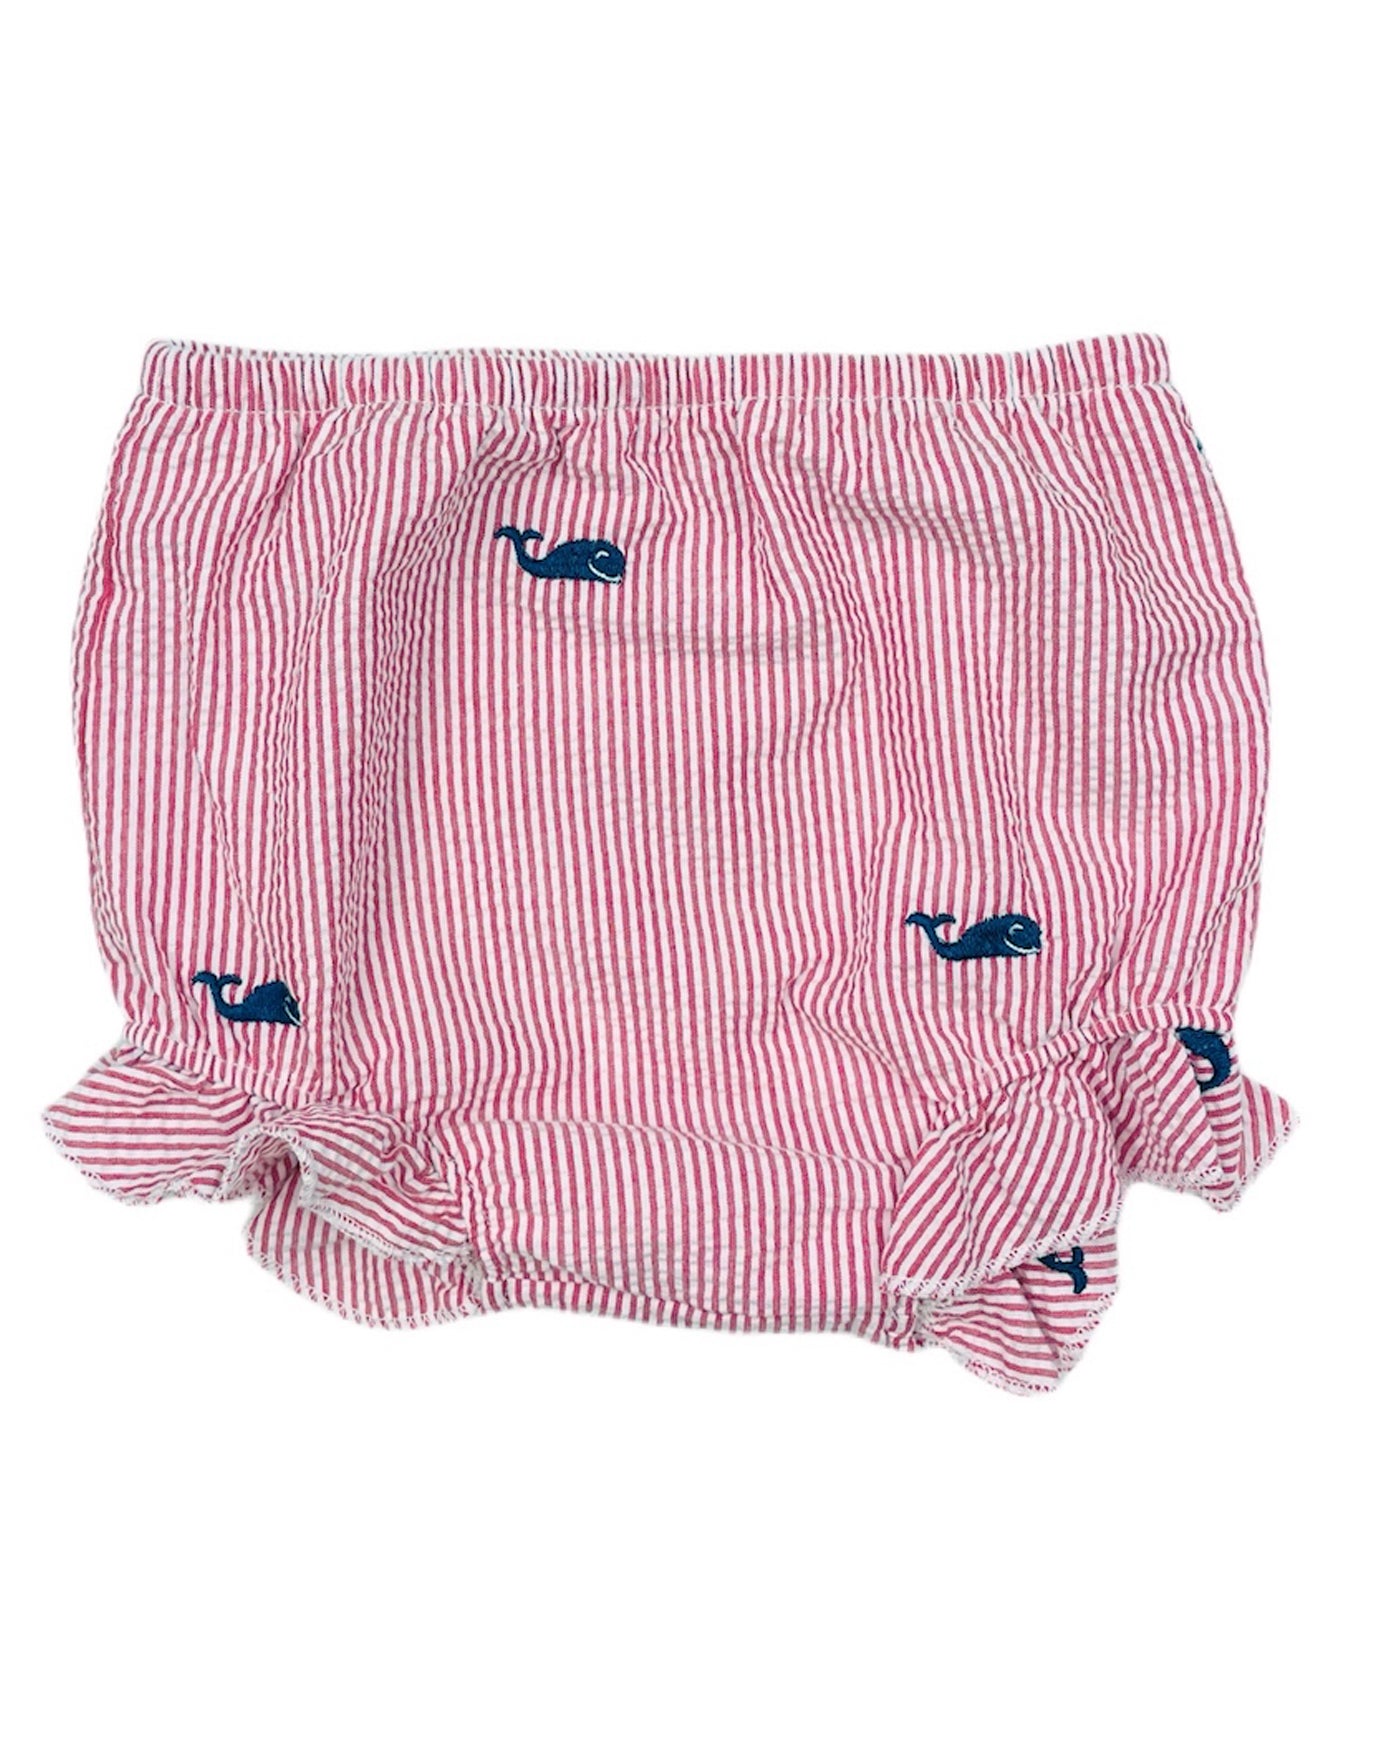 Red Seersucker Baby Bloomers with Navy Embroidered Whales